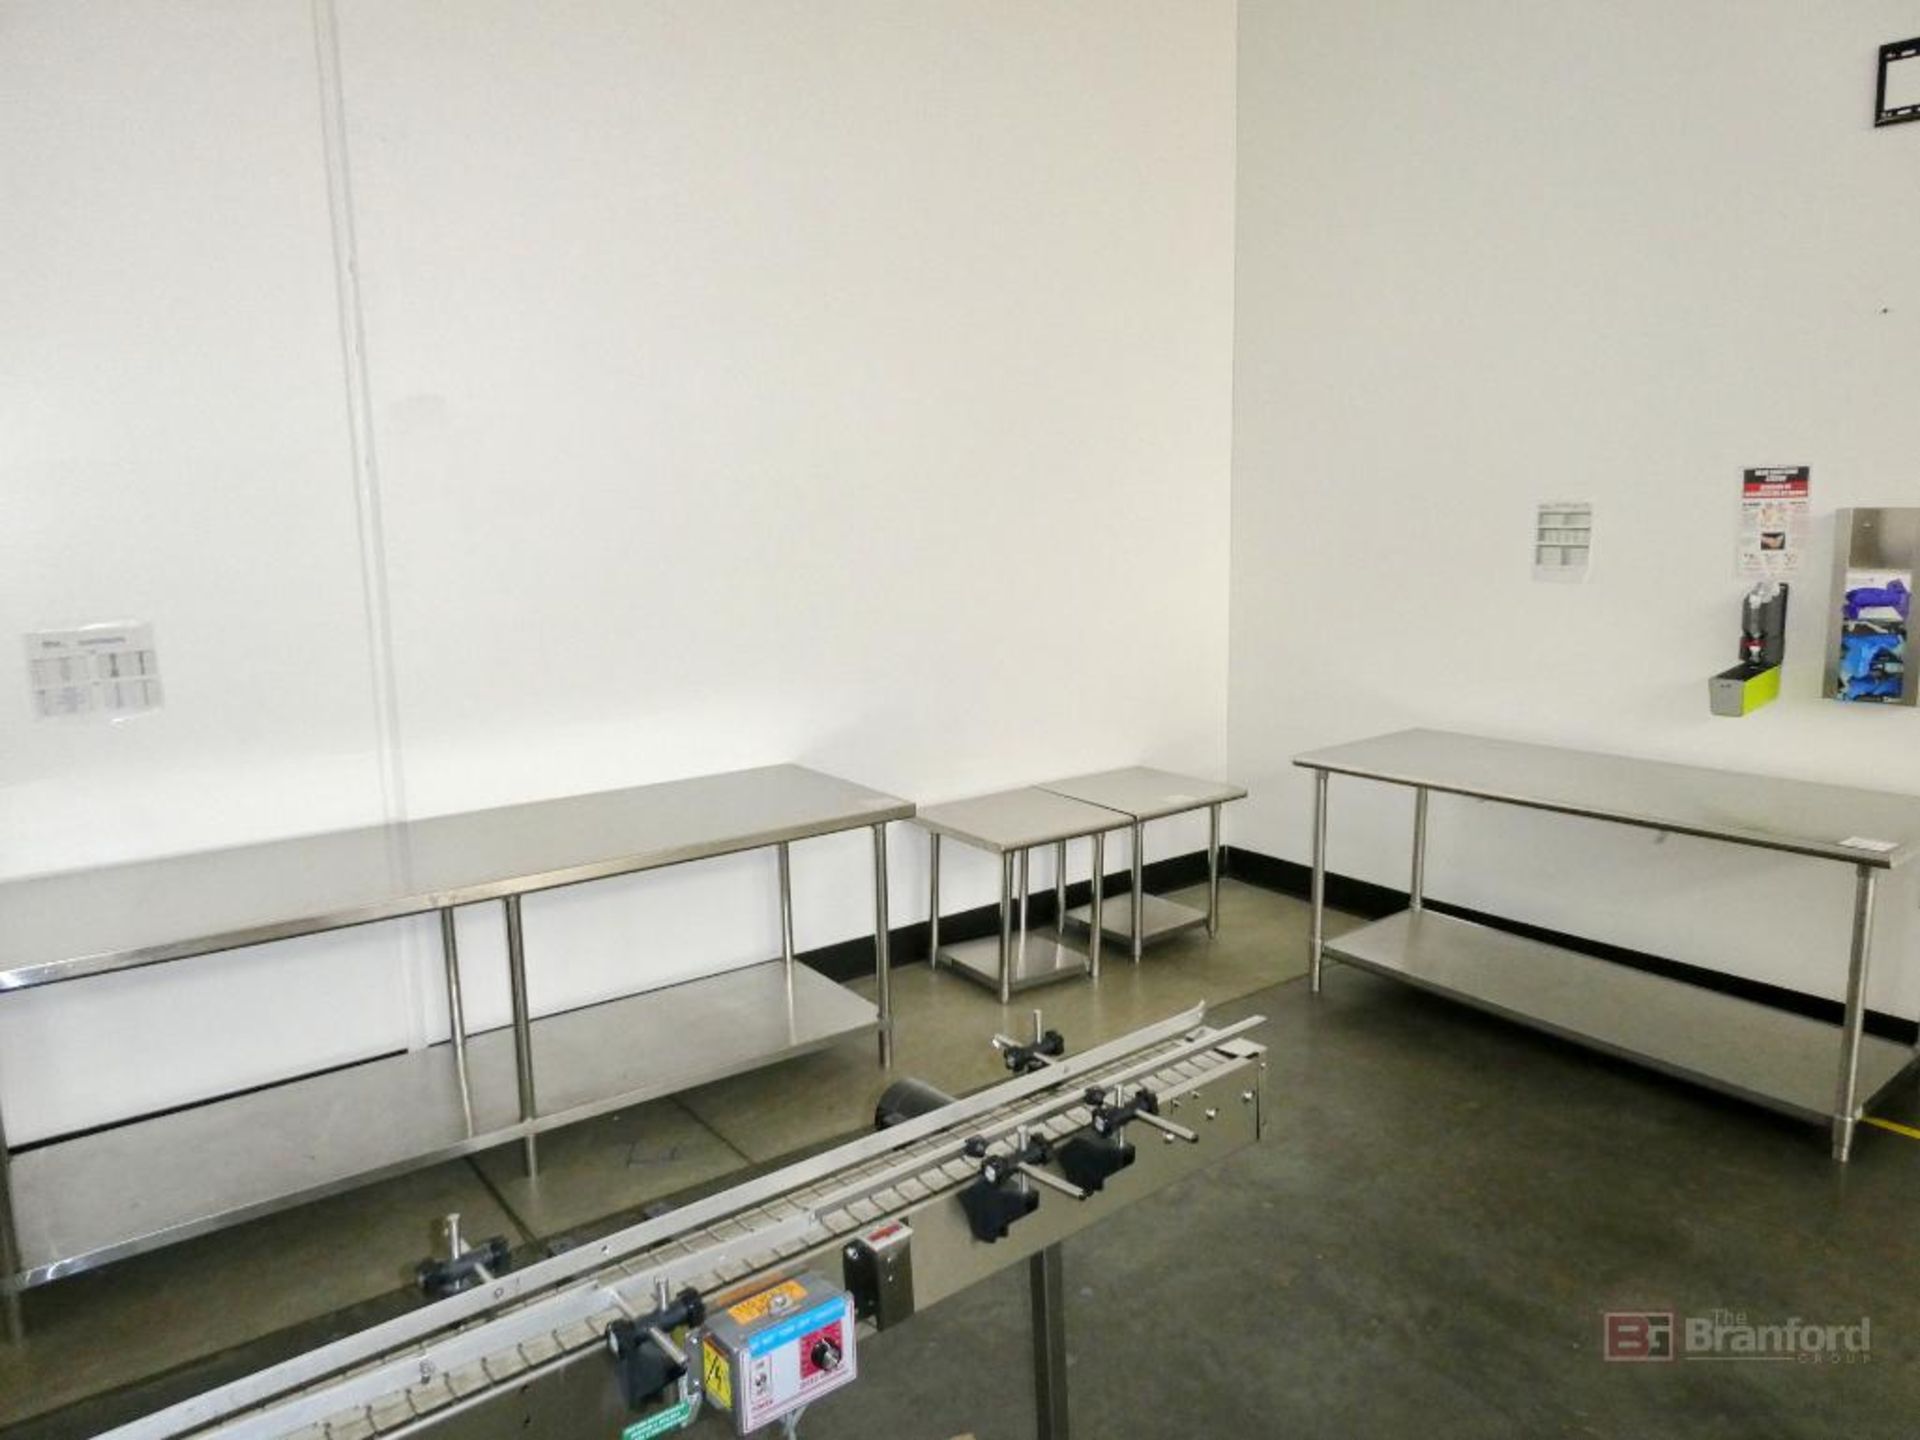 Assorted Stainless Steel Tables